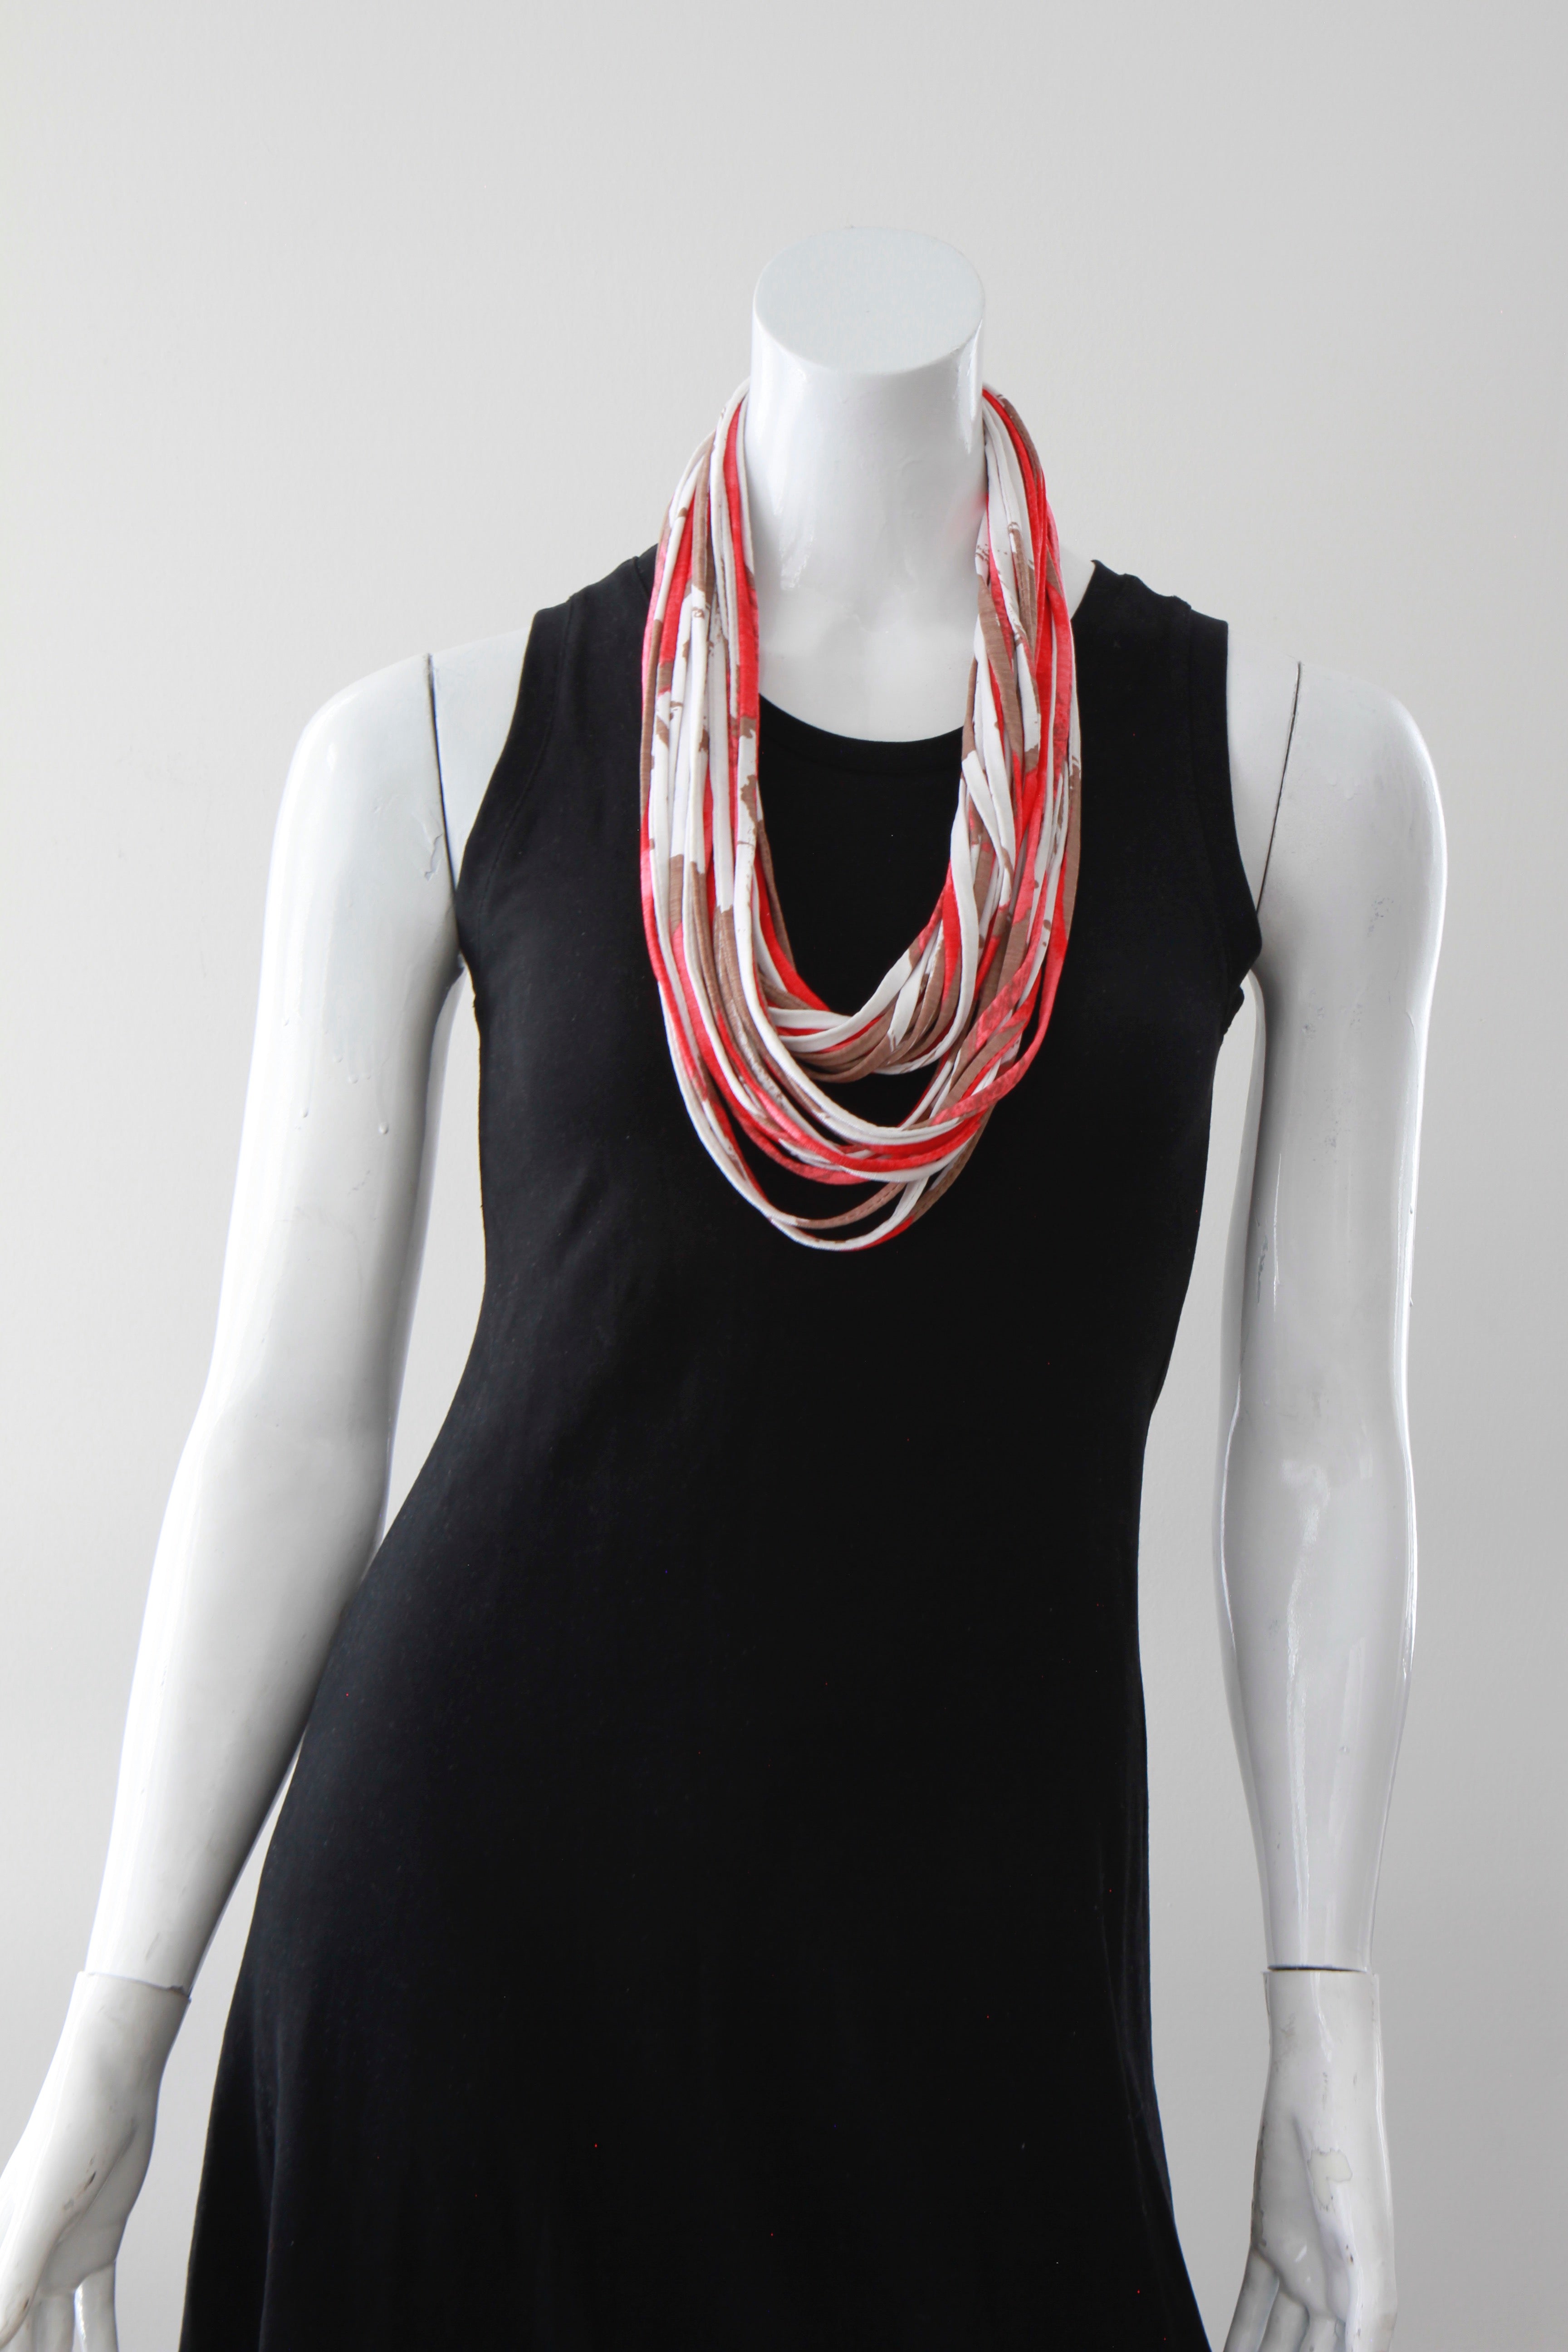 Living Coral' infinity Scarf or Statement Necklace for Women - Necknots